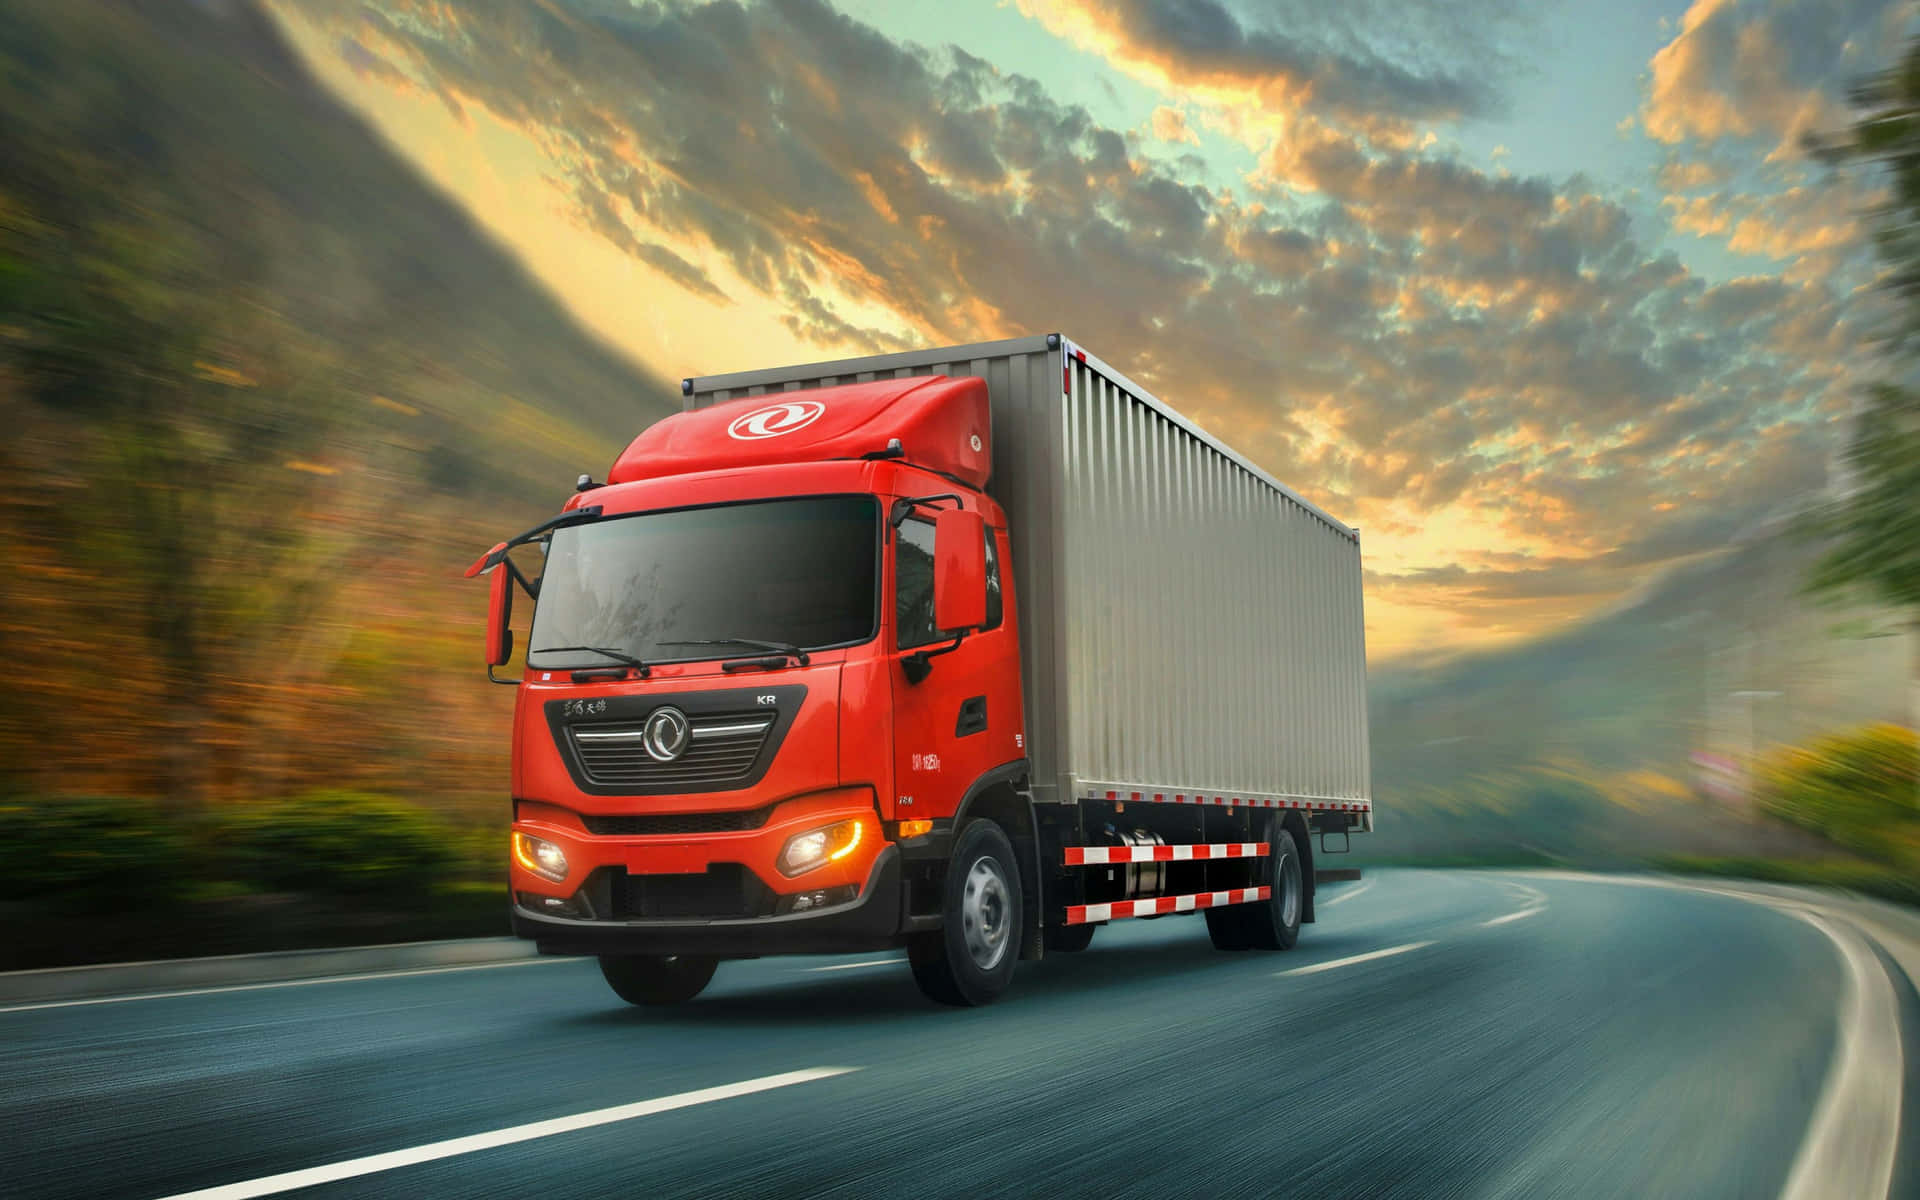 Dongfeng Heavy-Duty Truck on the Road Wallpaper